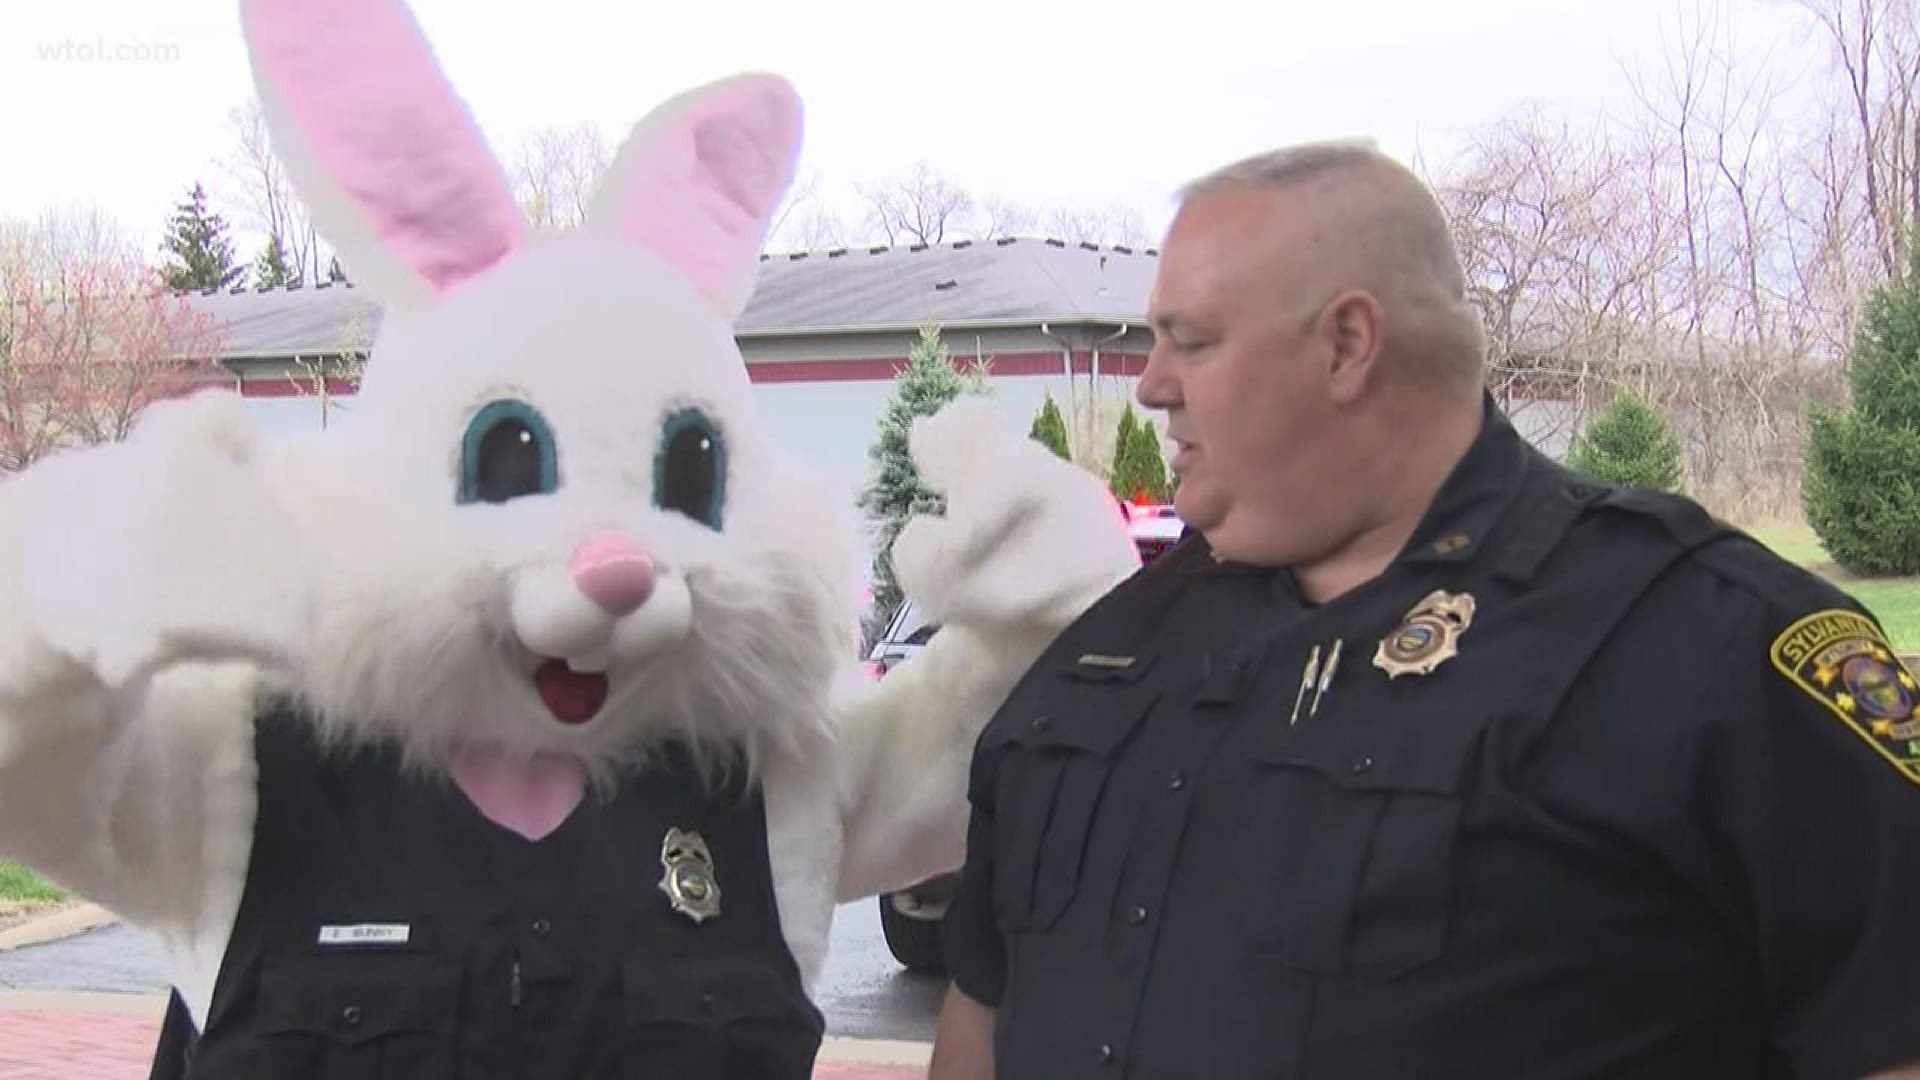 Sylvania PD would like to welcome its newest police officer, E. Bunny to the force.